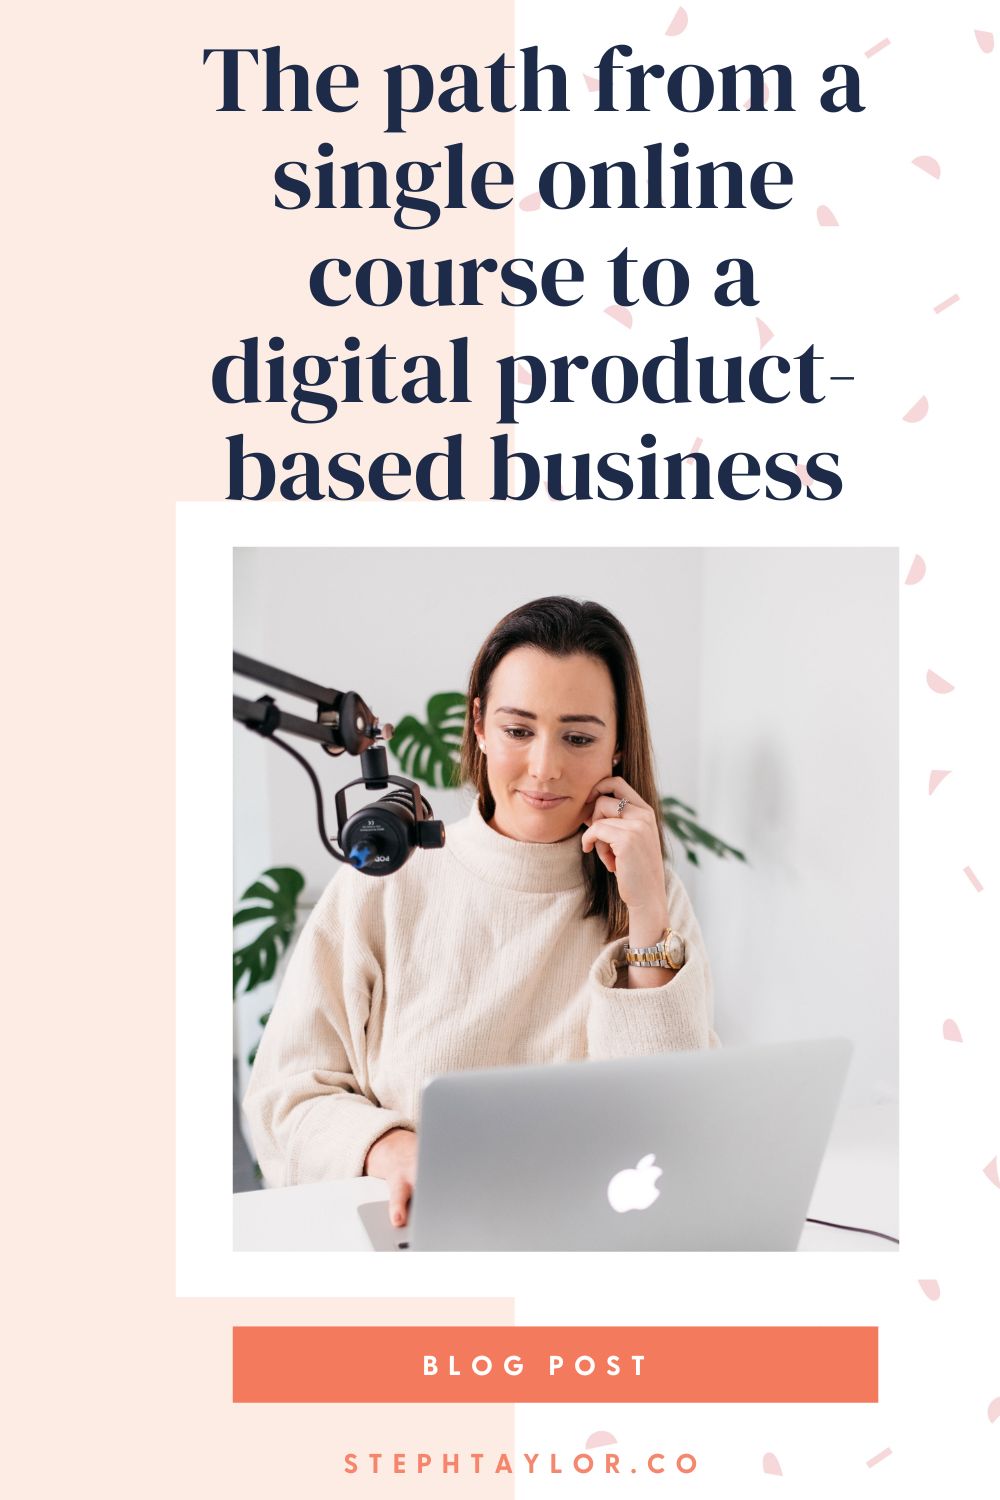 The path from a single online course to a digital product-based business